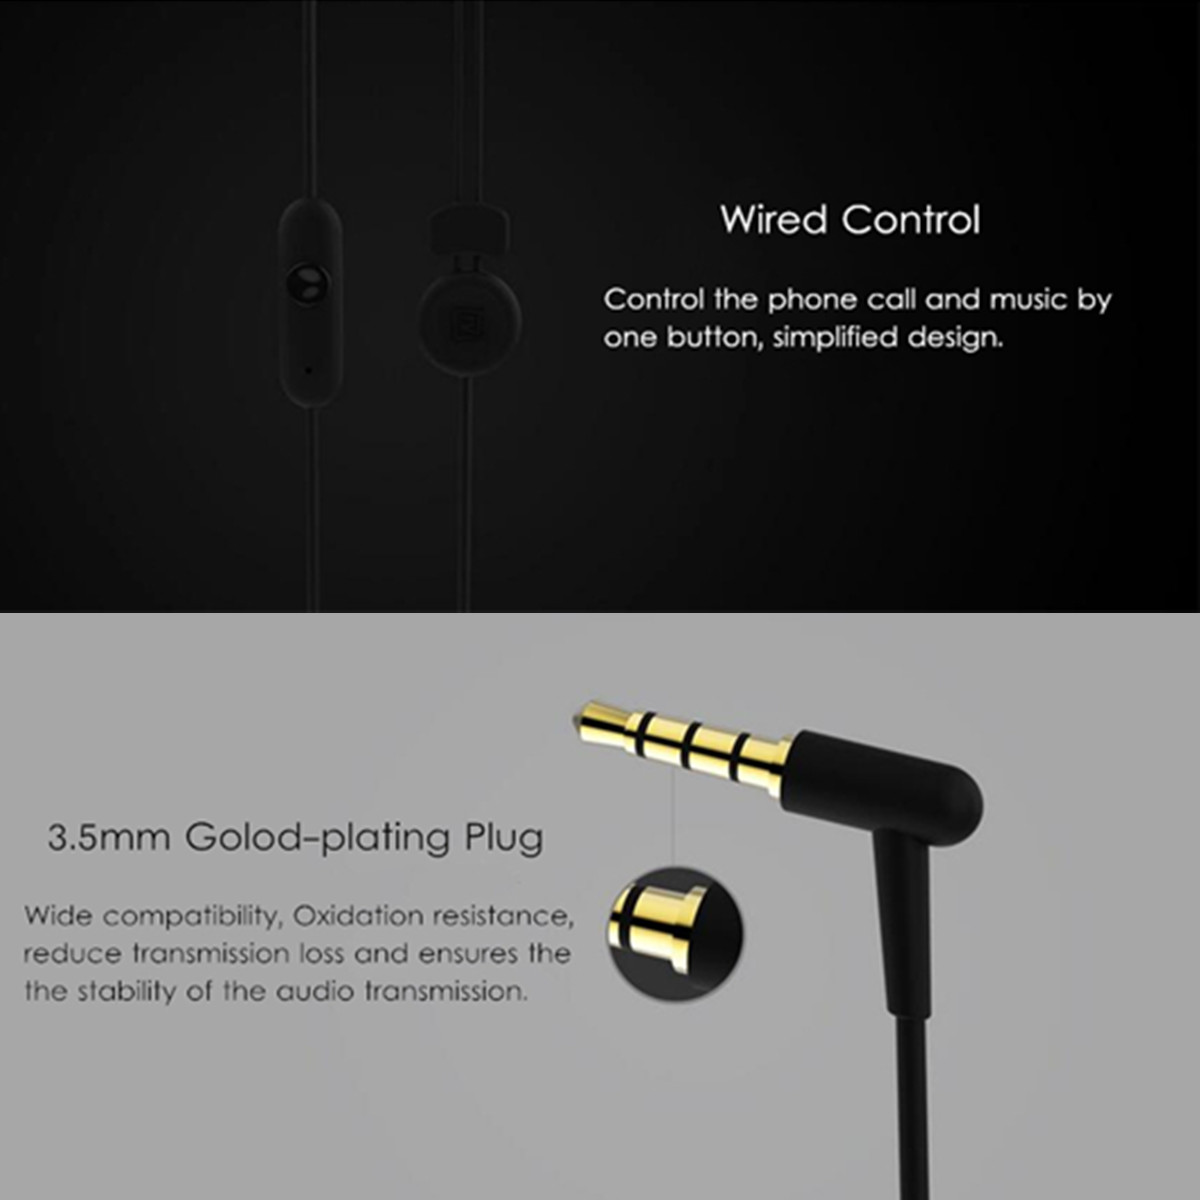 Remax-RM-510-35mm-Wired-Control-Earbuds-Earphone-In-ear-Stereo-Light-Headphone-with-Mic-1515466-5